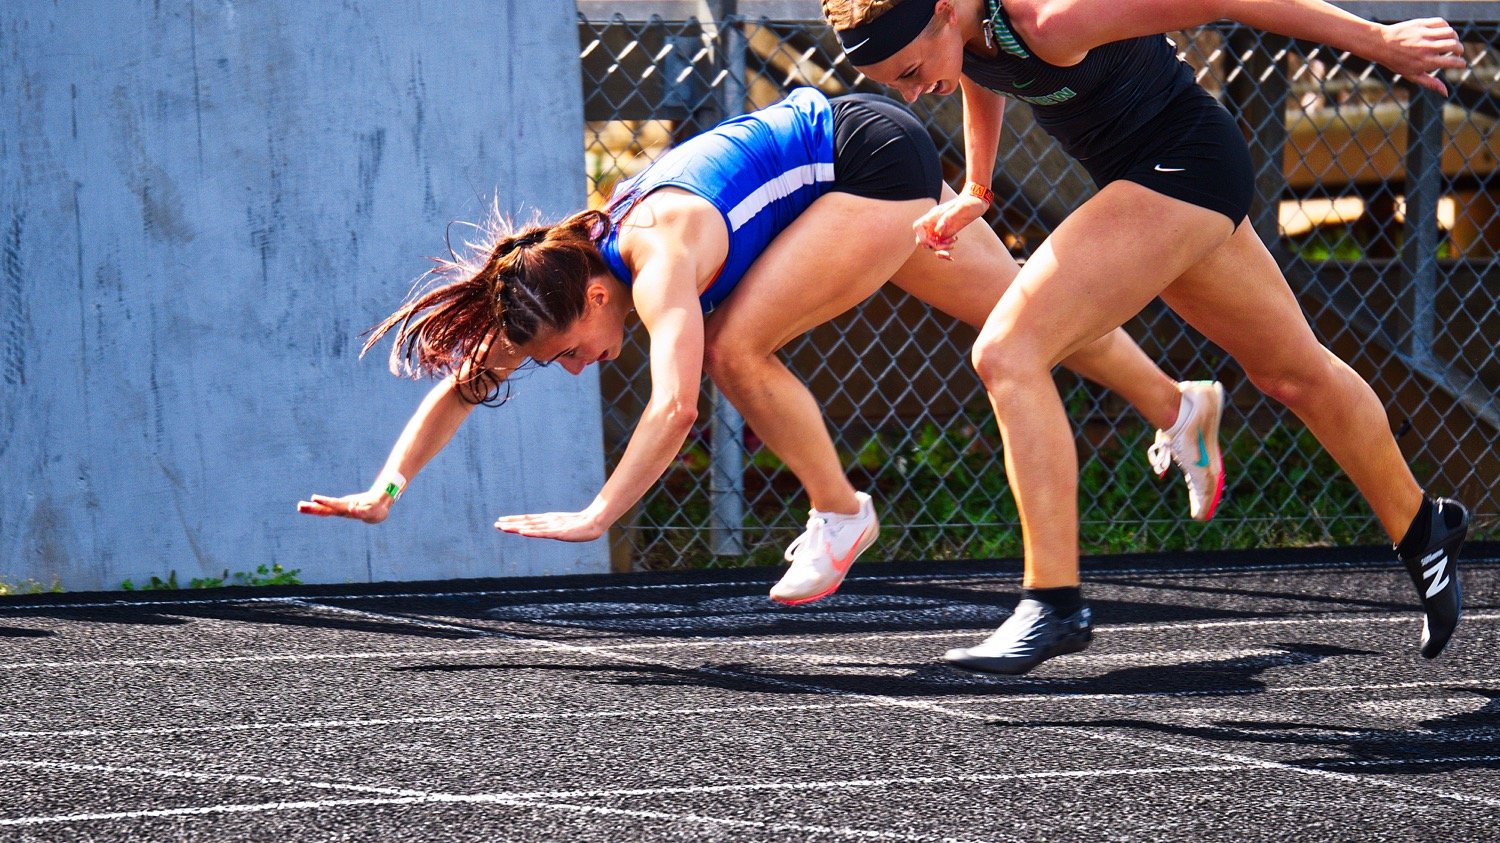 Quitman hurdler Brooklyn Marcee dives over the finish line to edge out Valley View's Rylee Gattenby for second place by one one-hundredth of a second in the 300 meter hurdles. [view more valiant efforts]